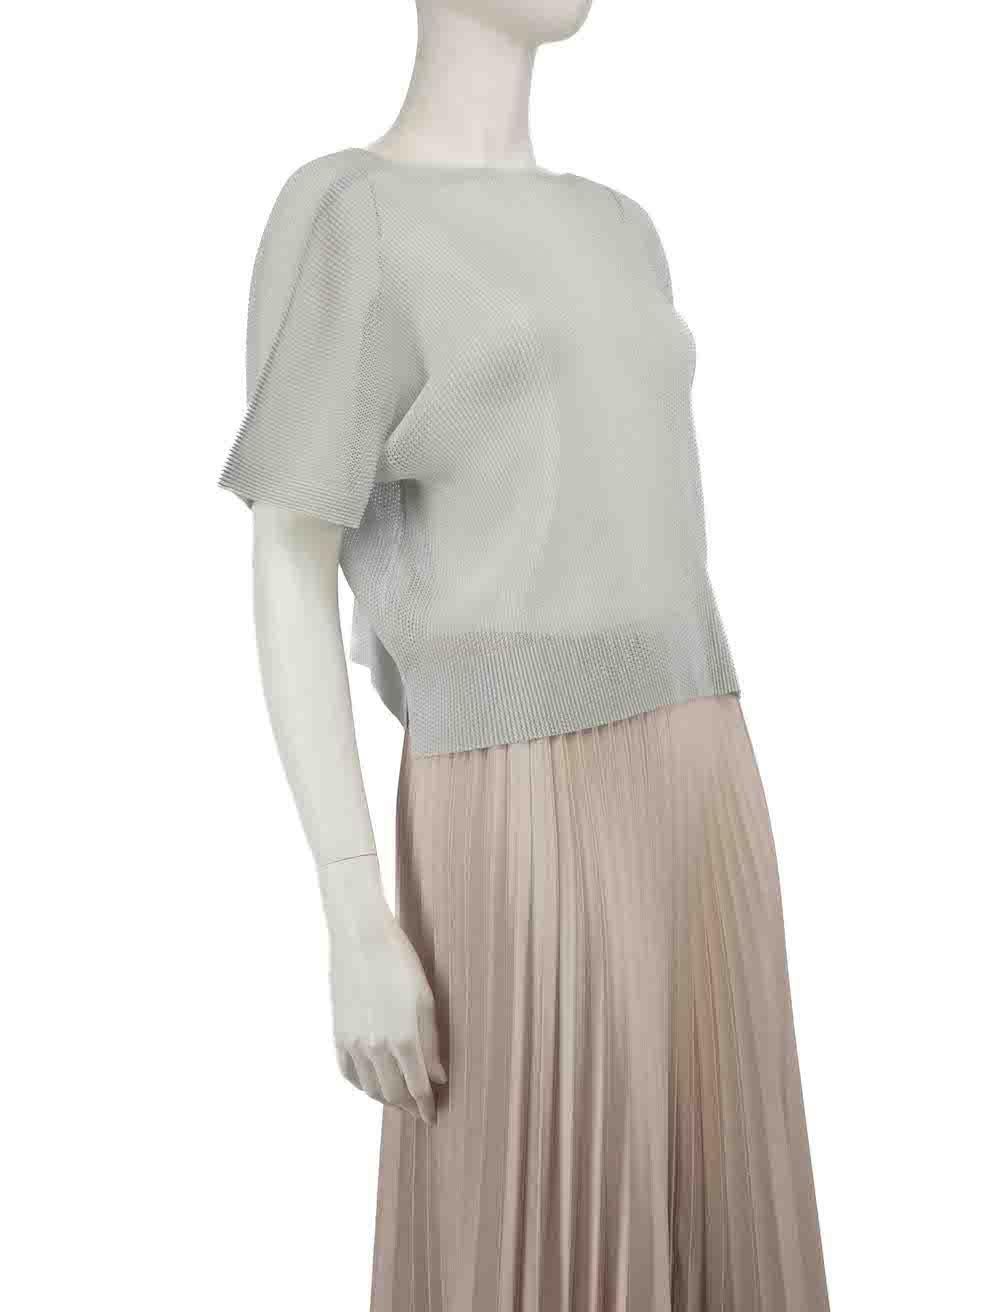 CONDITION is Never worn. No visible wear to top is evident on this new Pleats Please by Issey Miyake designer resale item.
 
 
 
 Details
 
 
 Grey
 
 Polyester
 
 Short sleeves top
 
 Mesh and sheer
 
 Round neckline
 
 Stretchy
 
 
 
 
 
 Made in